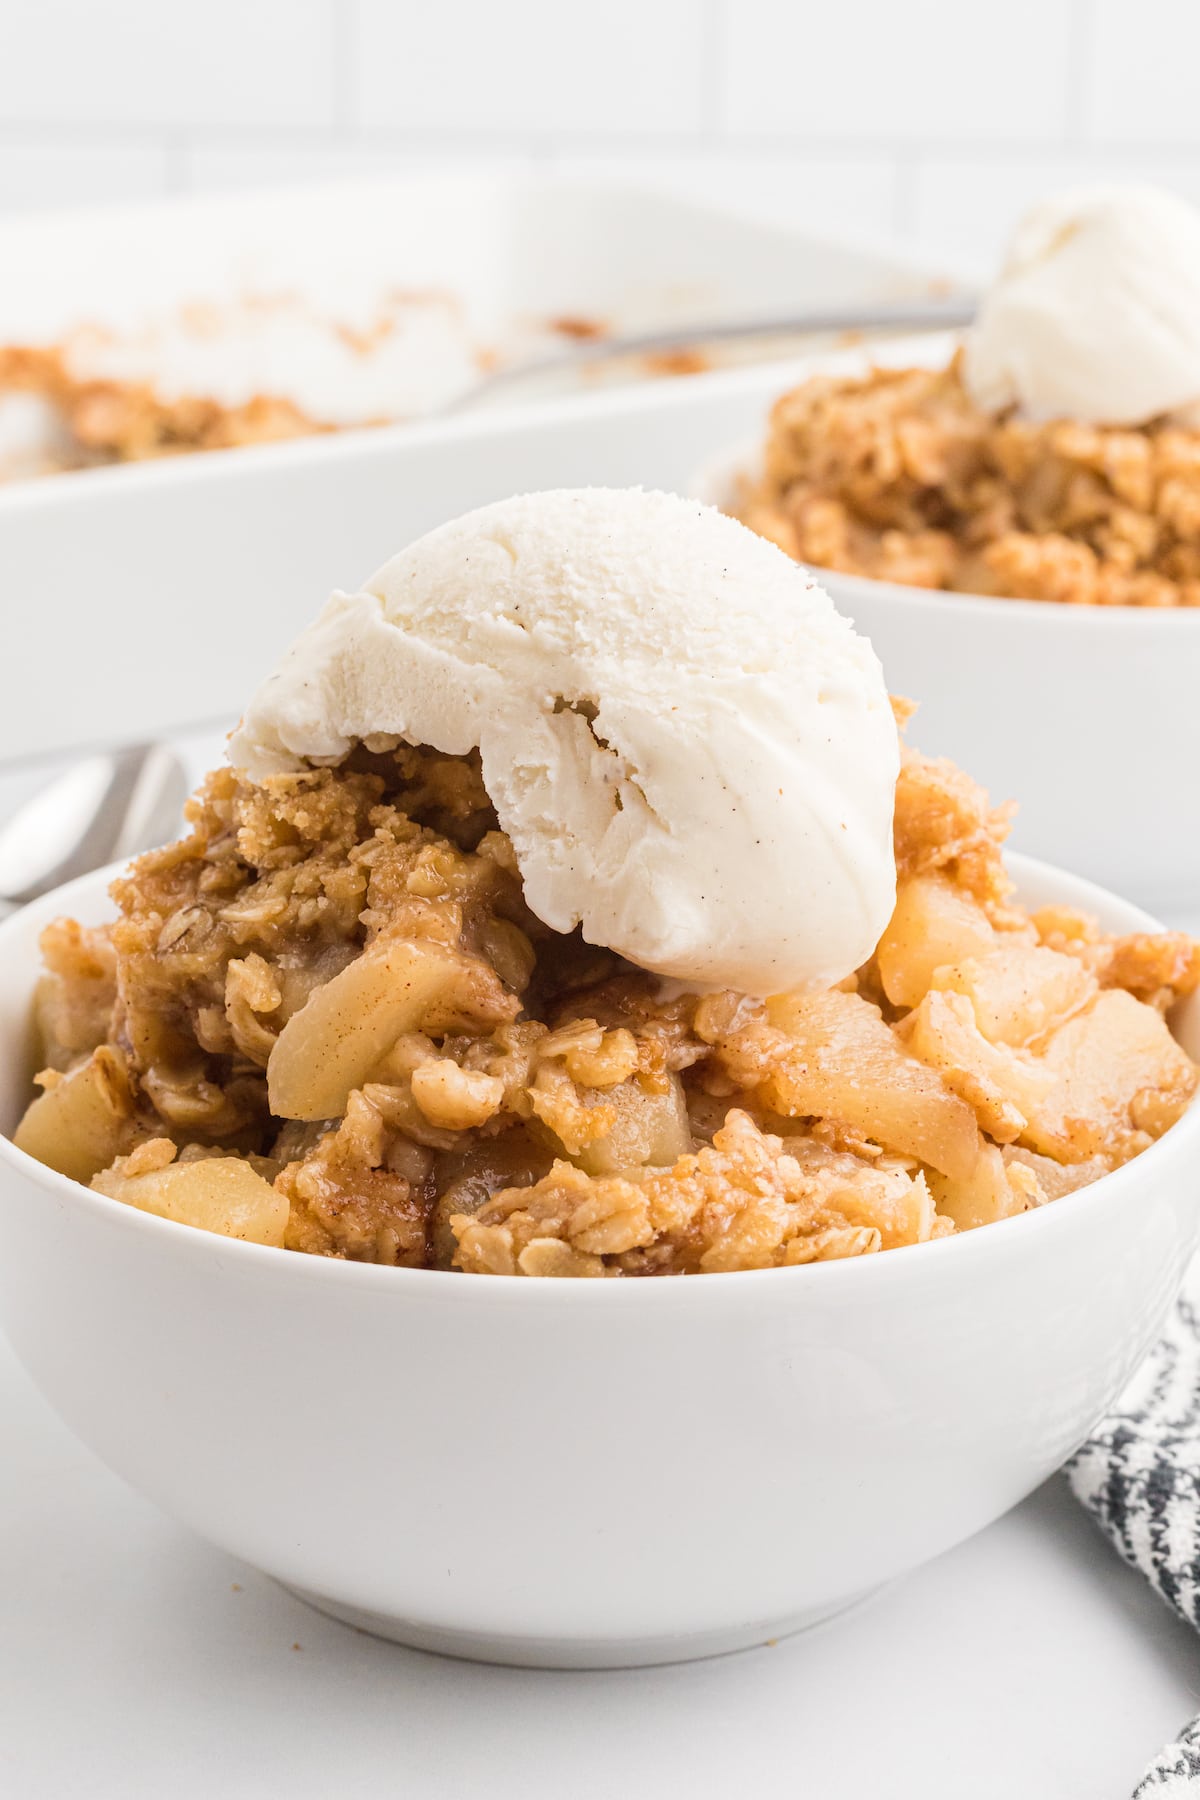 white dessert bowls filled with pear crisp and scoops of vanilla ice cream on top.